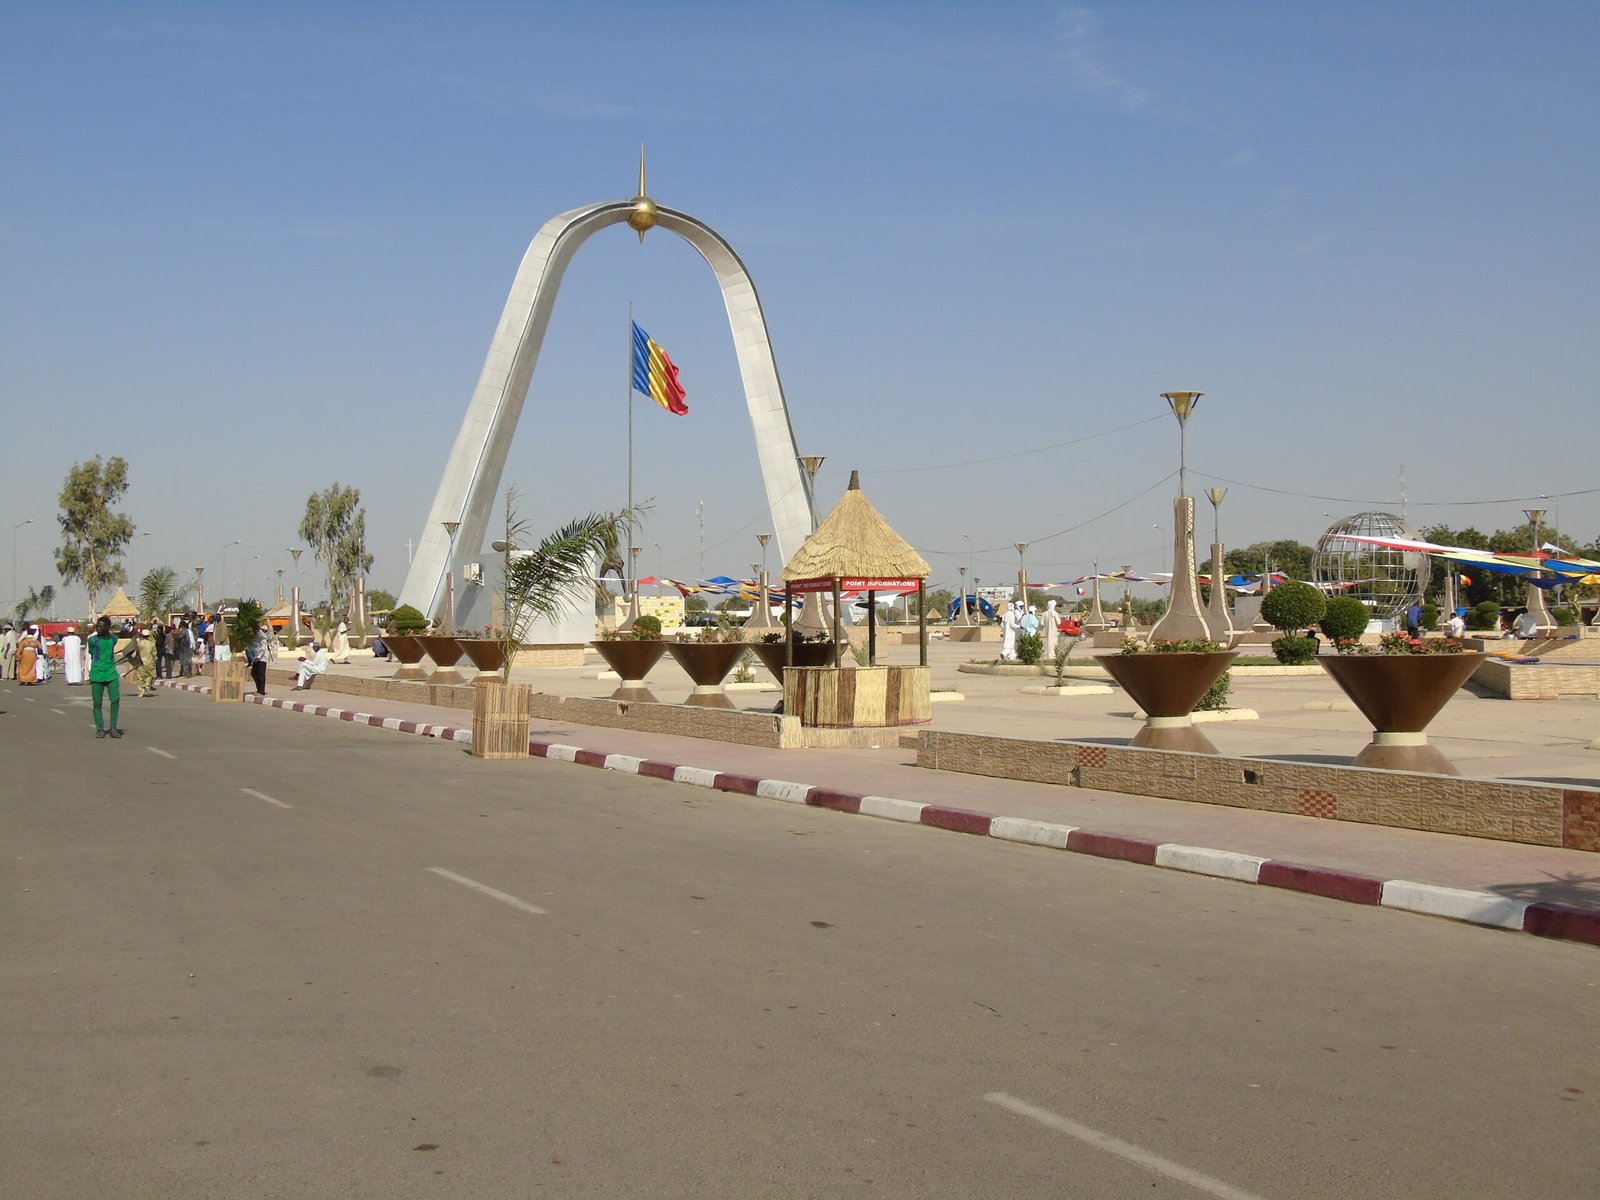 TCHAD COUNTRY